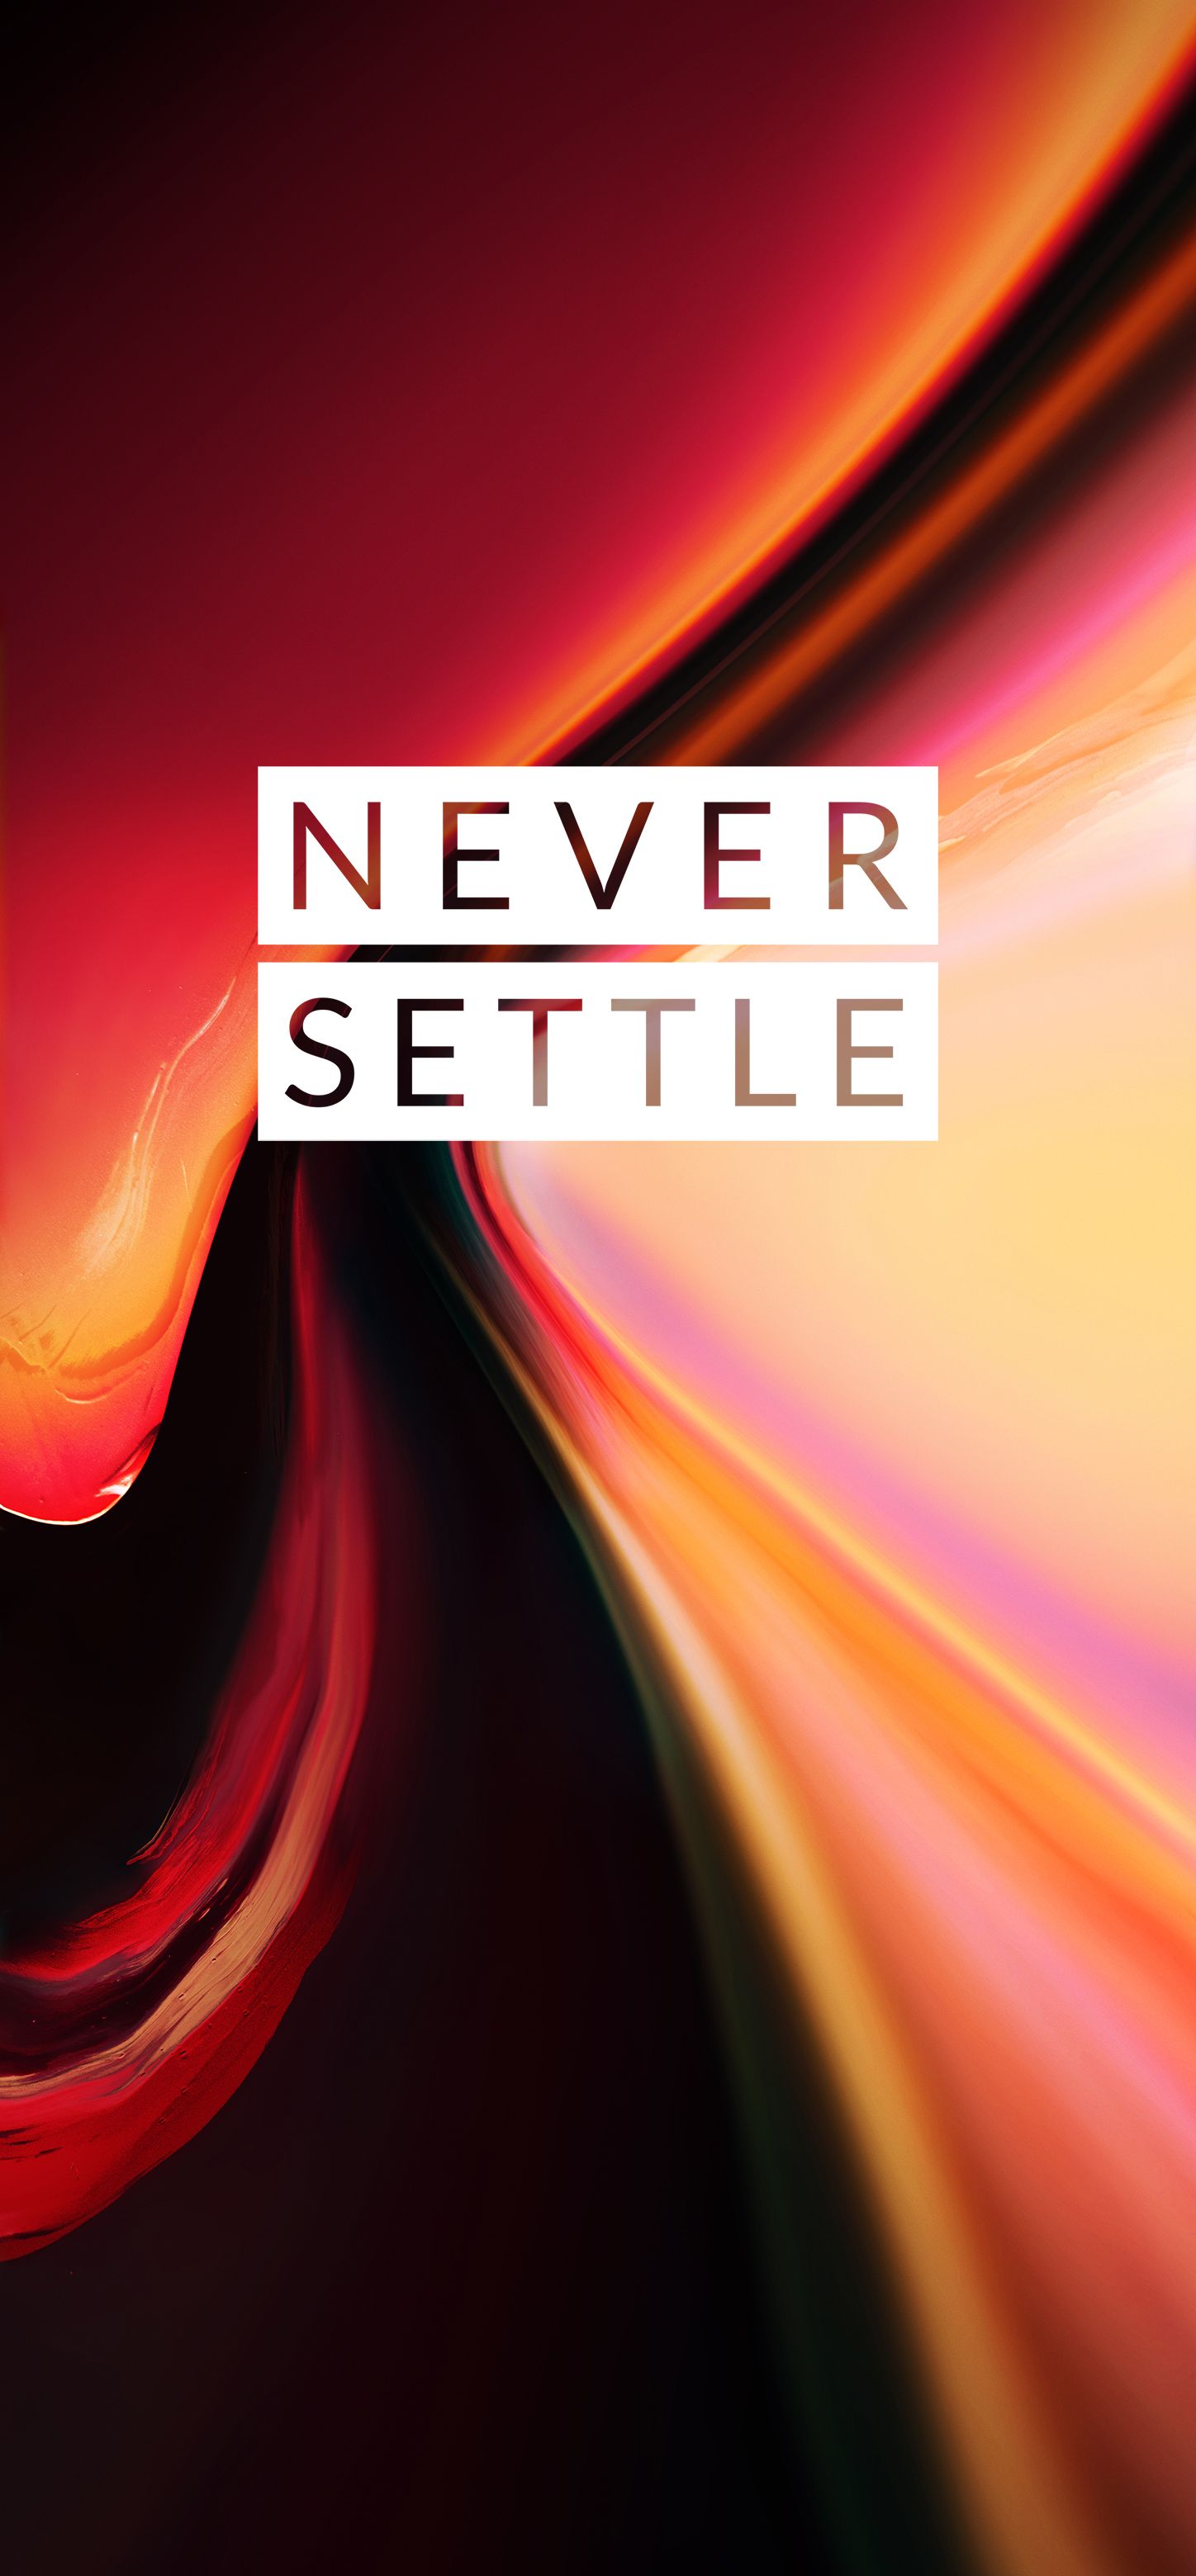 Download Oneplus Never Settle Dripping Wallpaper | Wallpapers.com